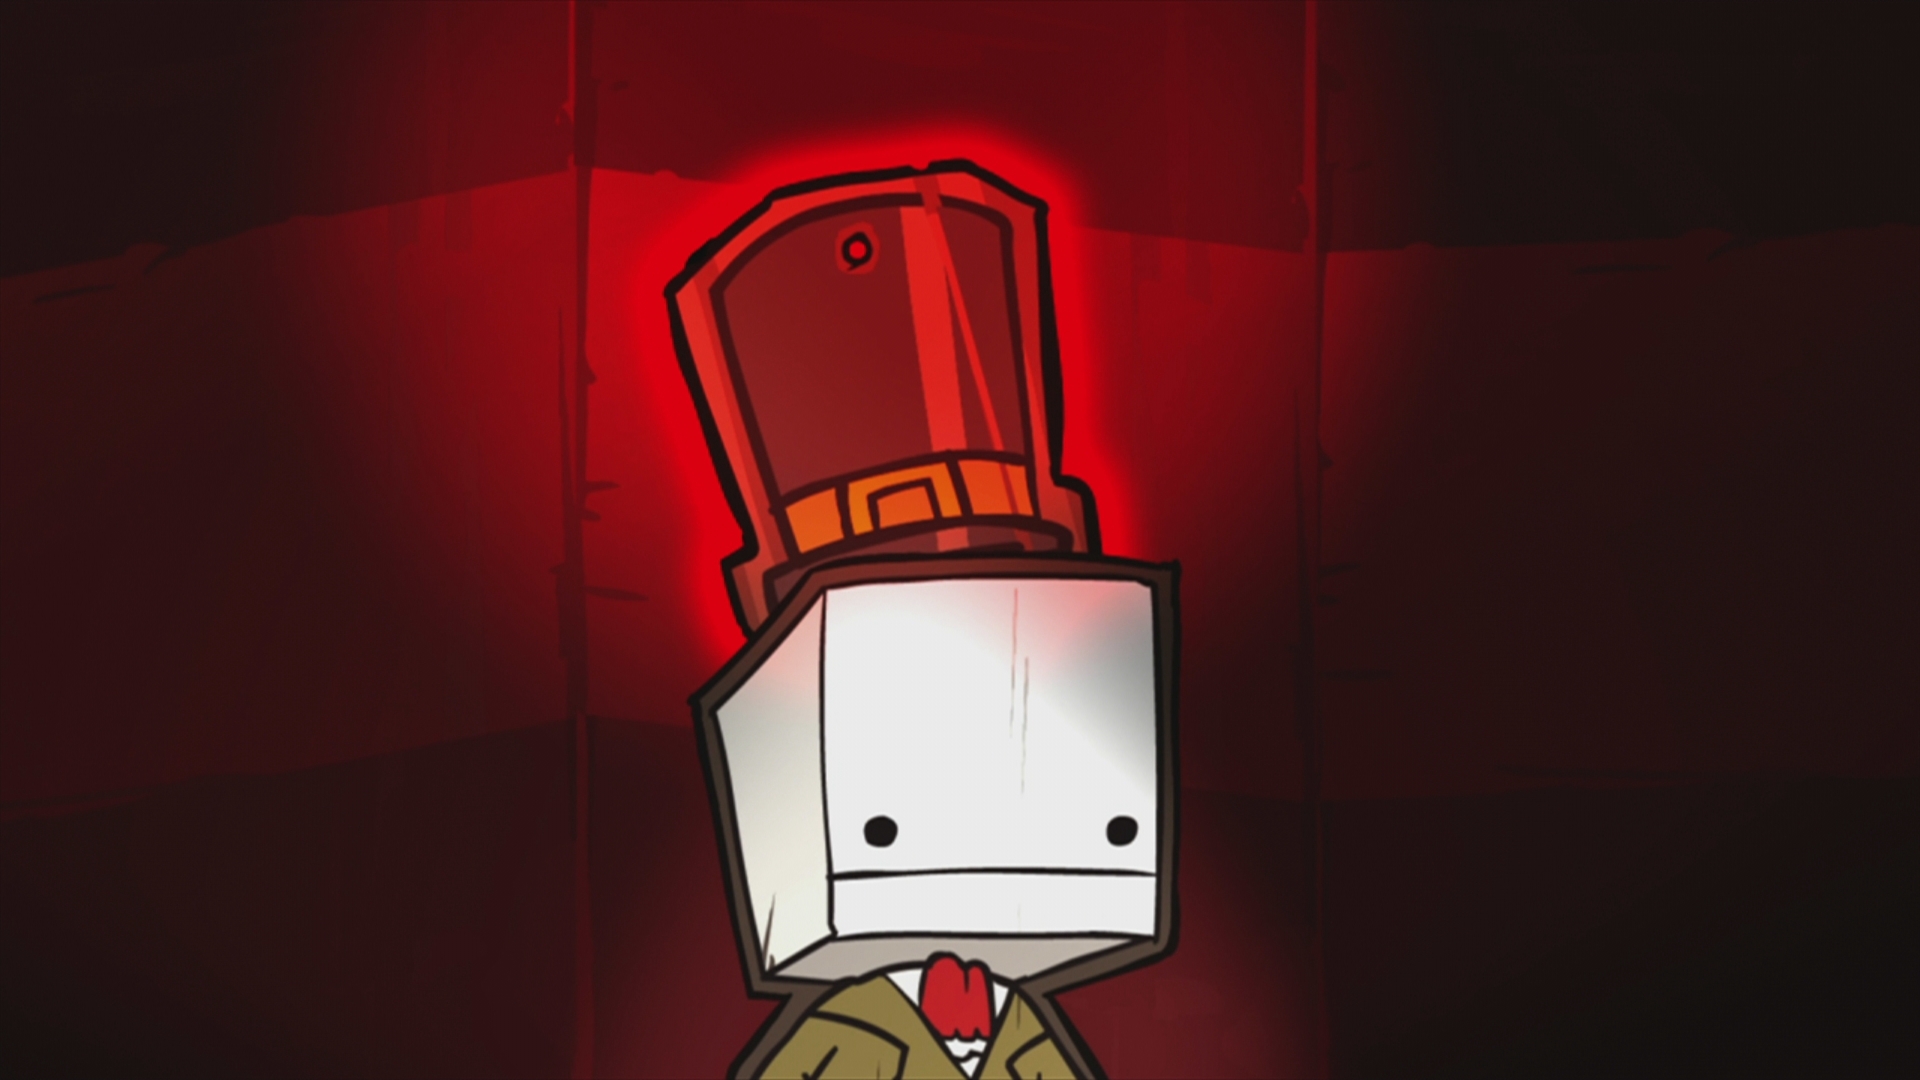 BattleBlock Theater Wallpapers High Quality Download Free.